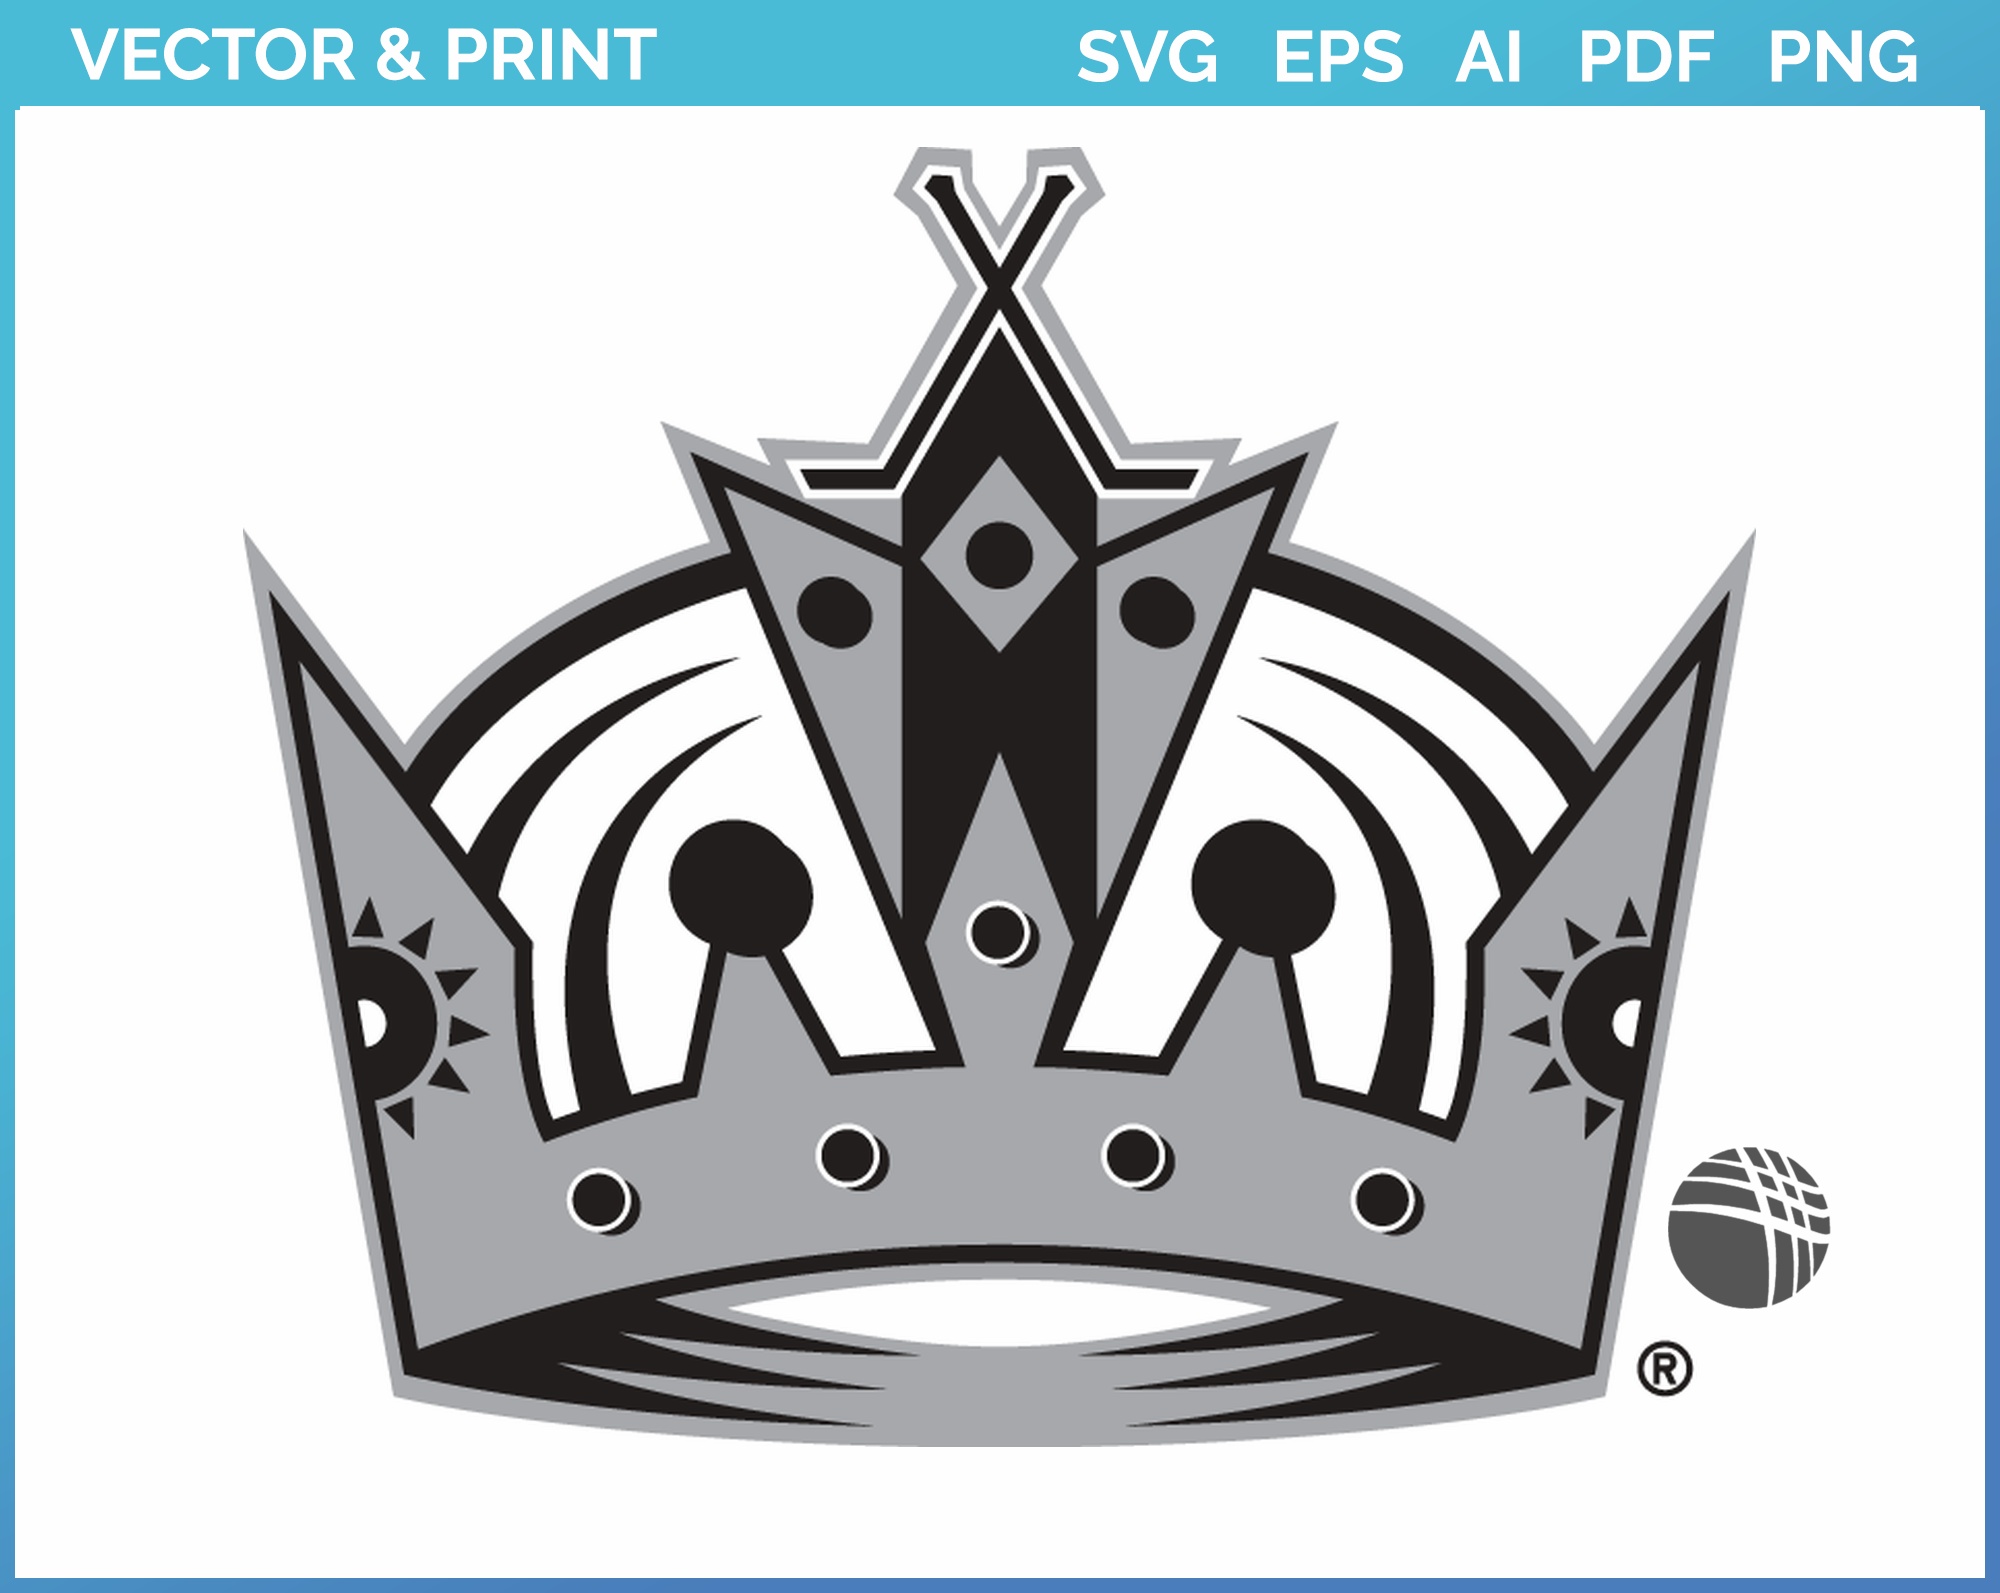 los angeles kings purple gold crown logo svg Archives - Free